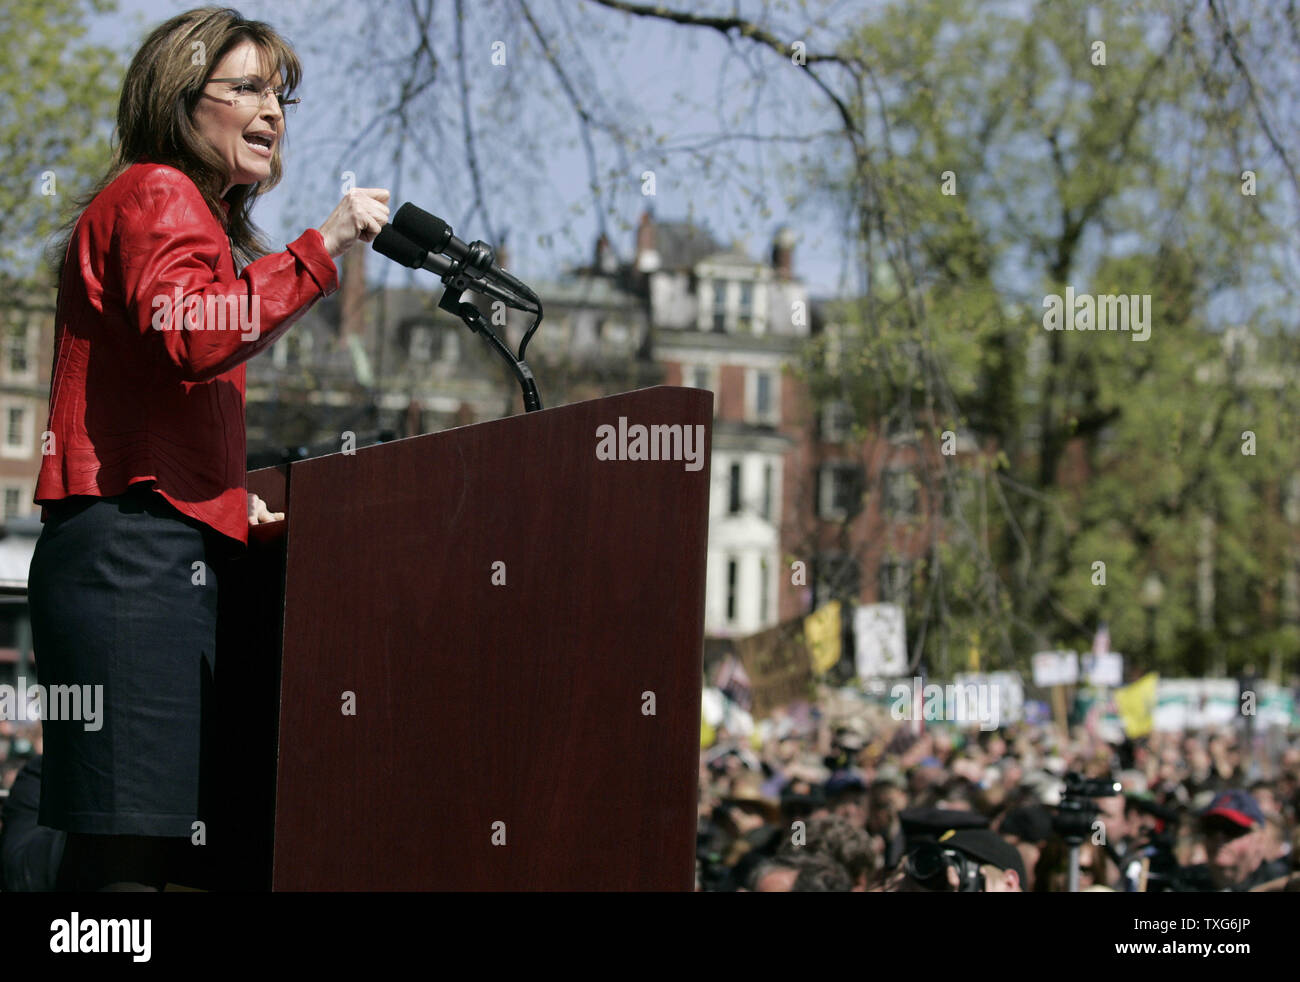 Former Alaska Governor Sarah Palin speaks to a large crowd gathered on Boston Common during a Tea Party Express rally in Boston, Massachusetts on Wednesday, April 14, 2010.     UPI/Matthew Healey Stock Photo